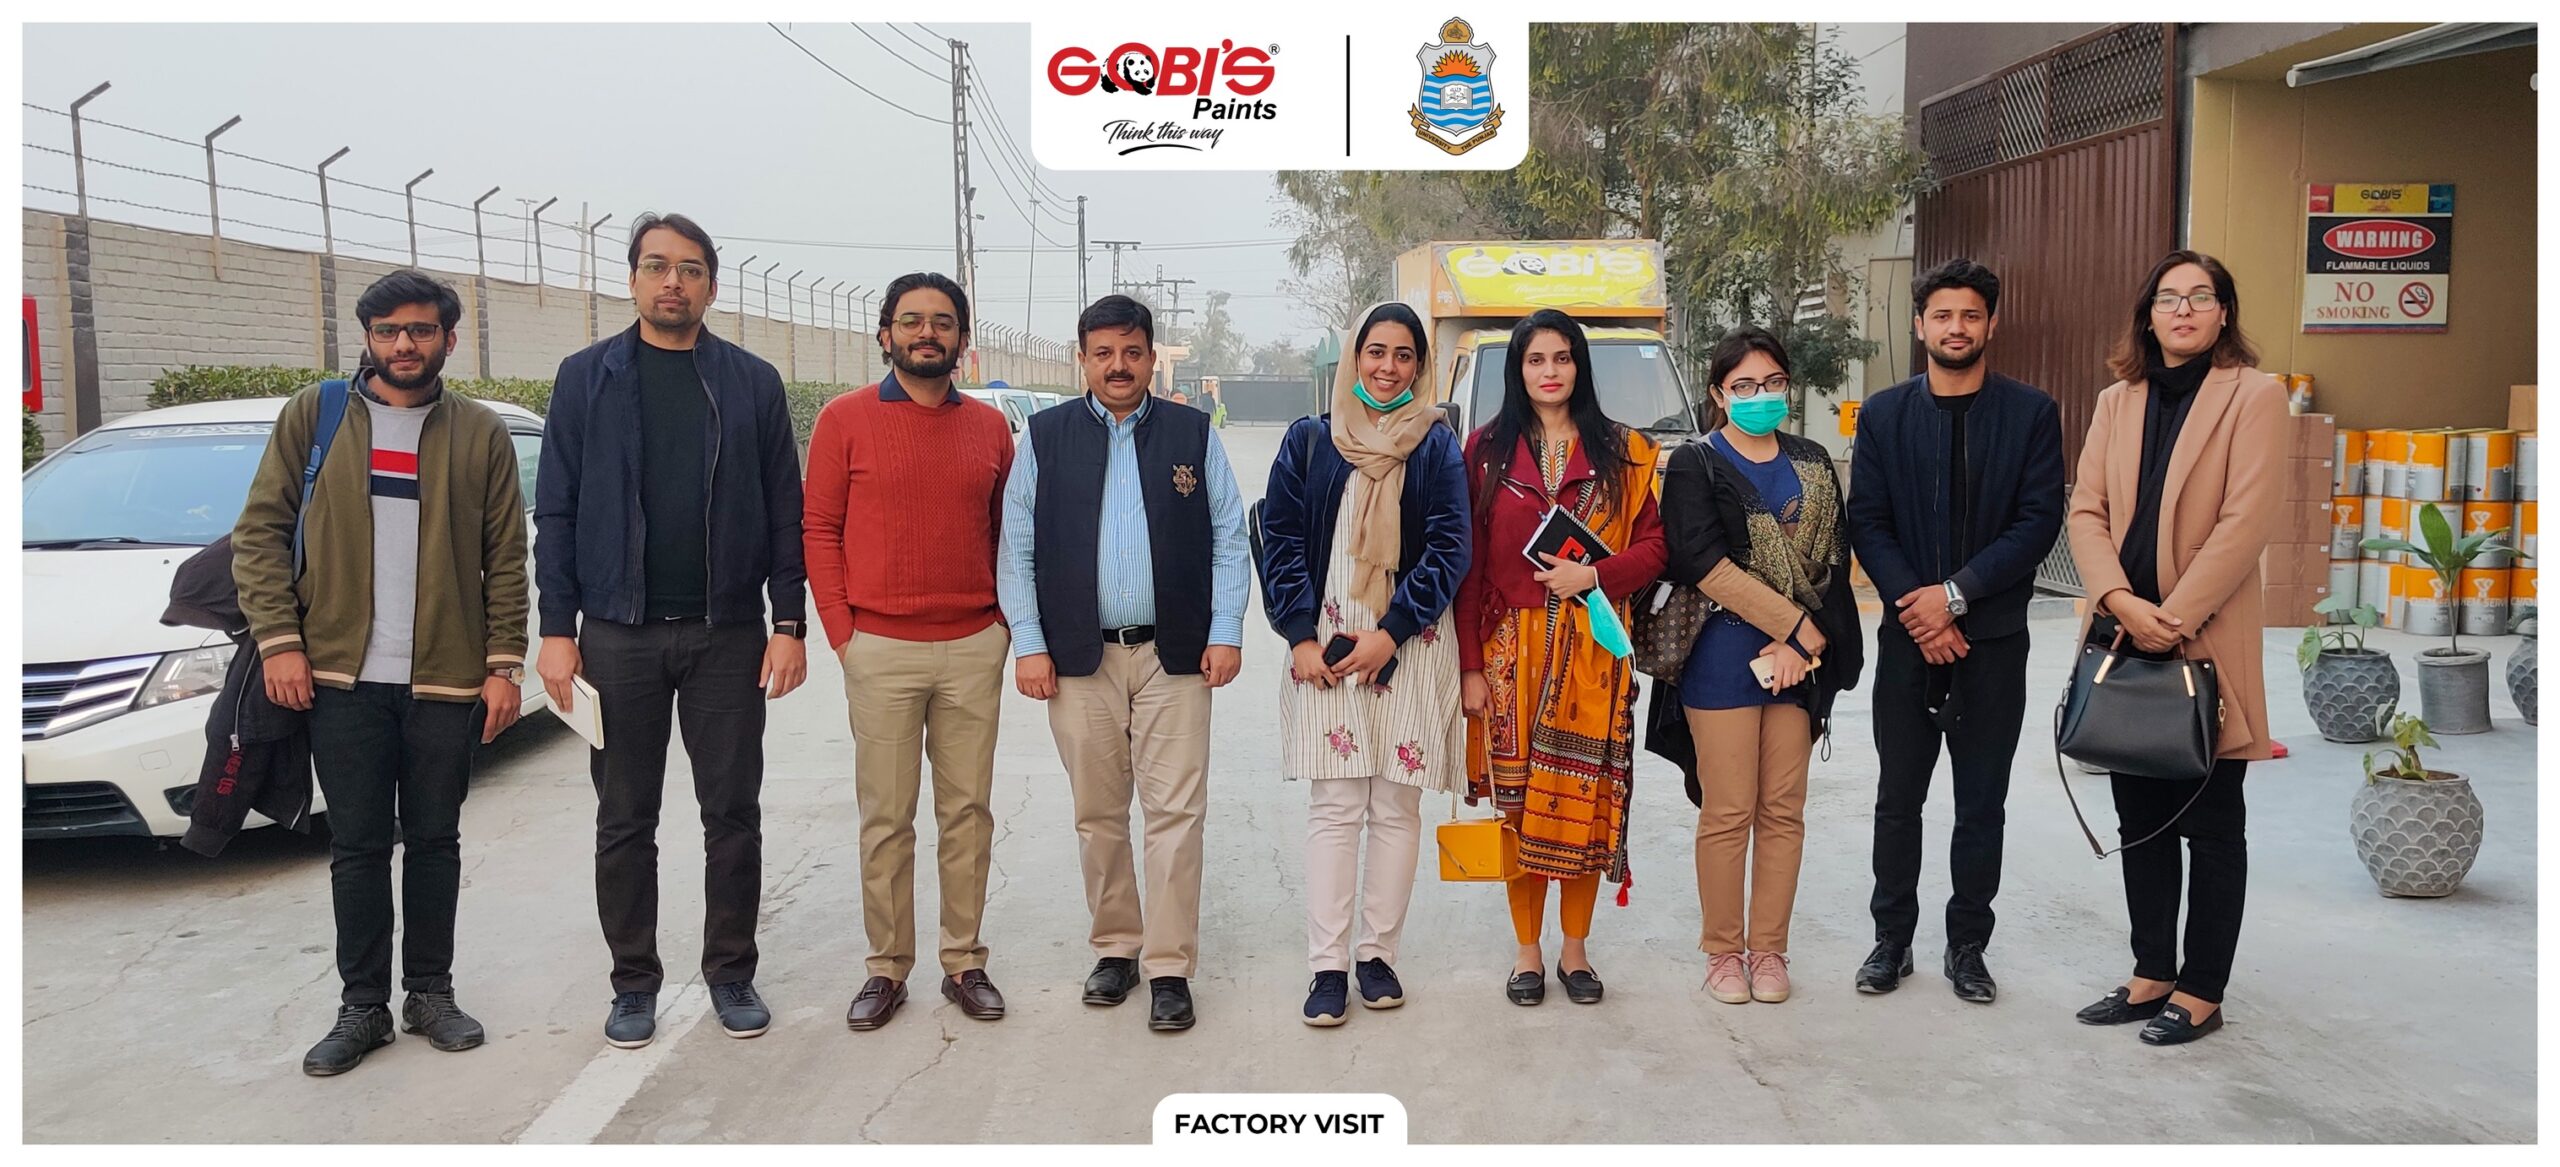 University of the Punjab  students visited the Gobi’s Paints factory